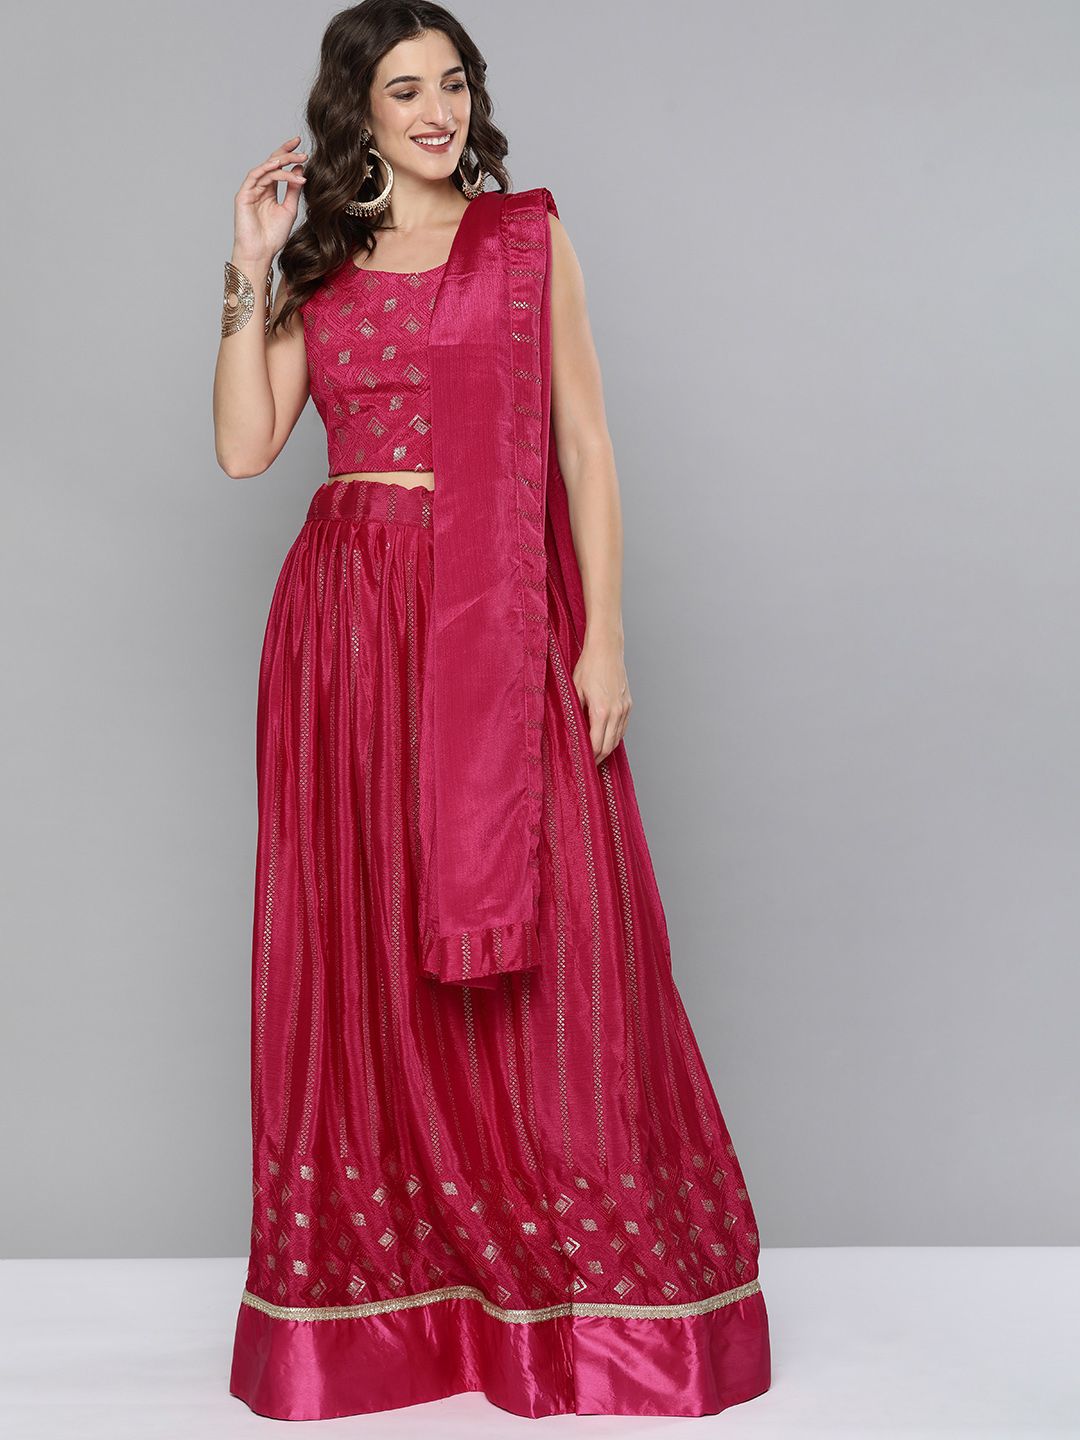 Kvsfab Pink Embroidered Semi-Stitched Lehenga & Unstitched Blouse With Dupatta Price in India